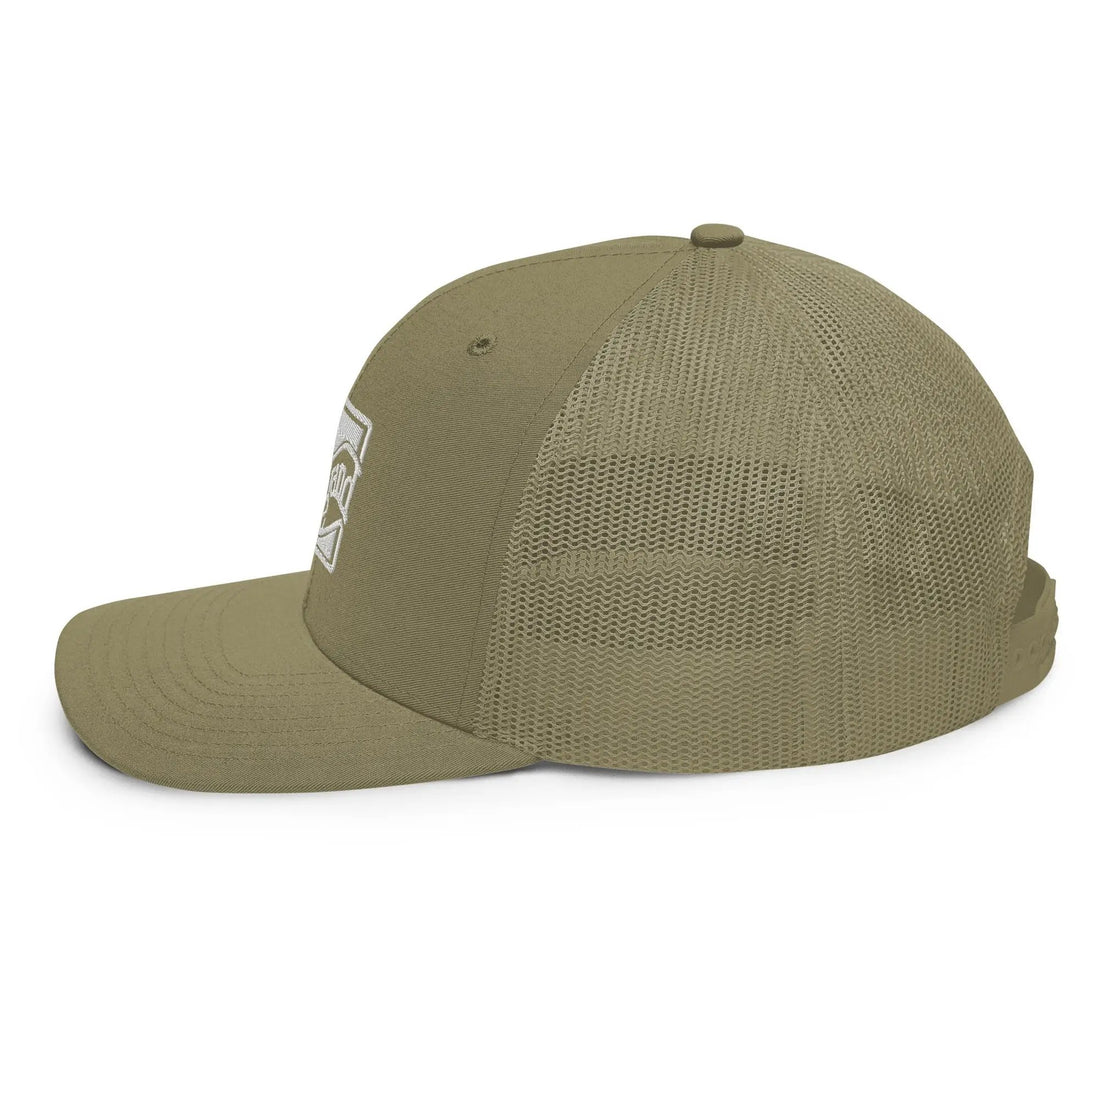 a khaki green hat with a white logo on the front